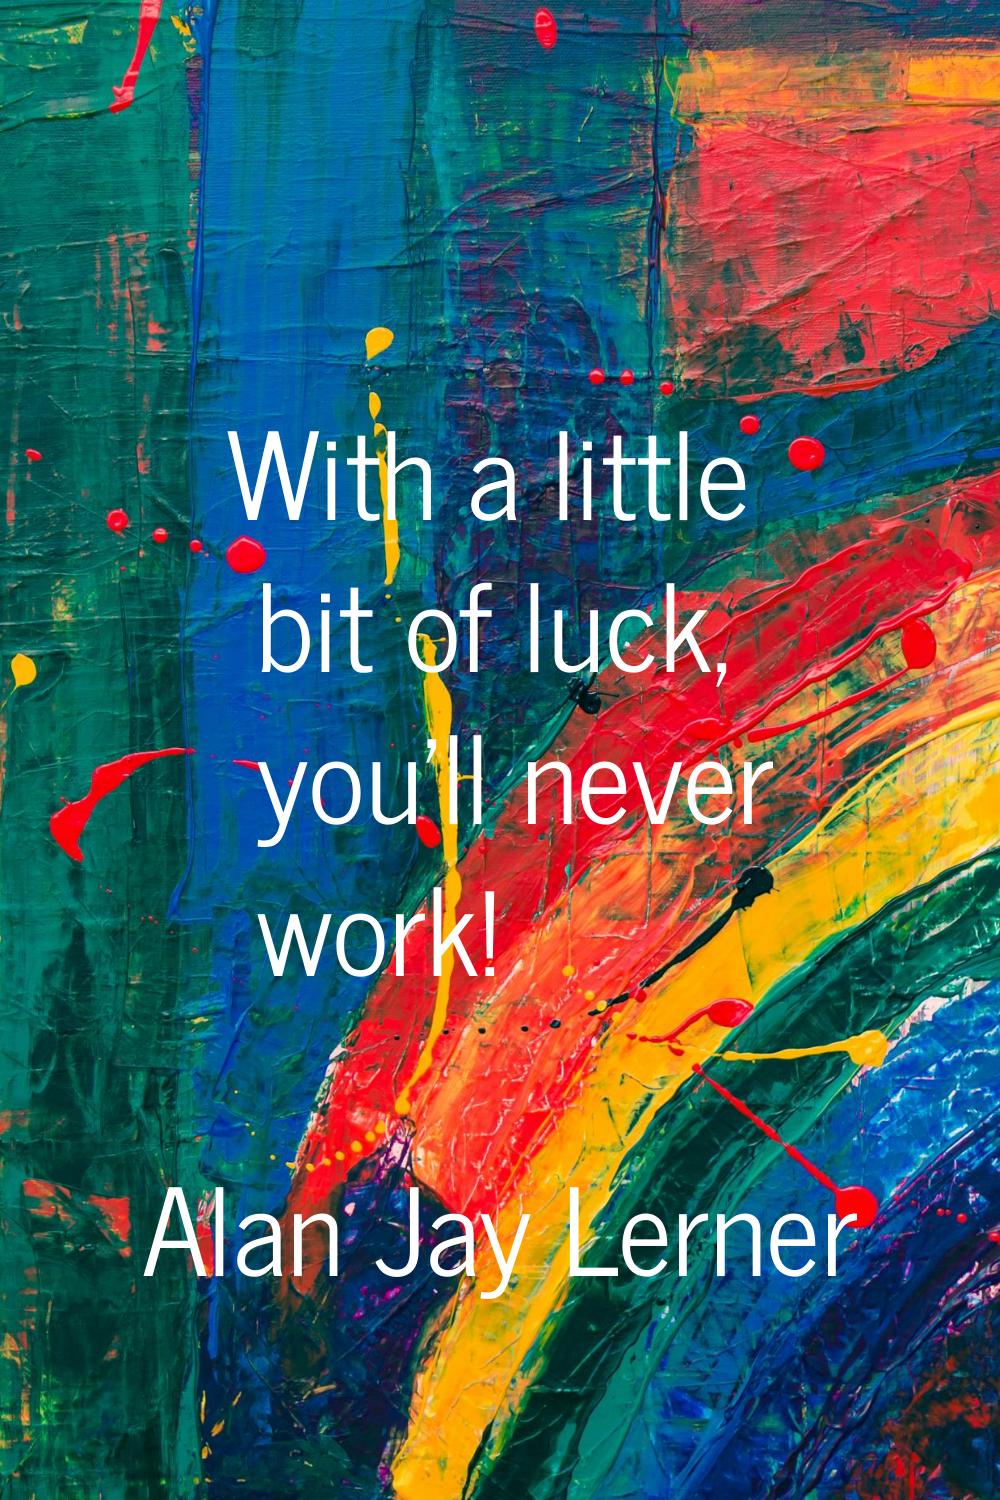 With a little bit of luck, you'll never work!